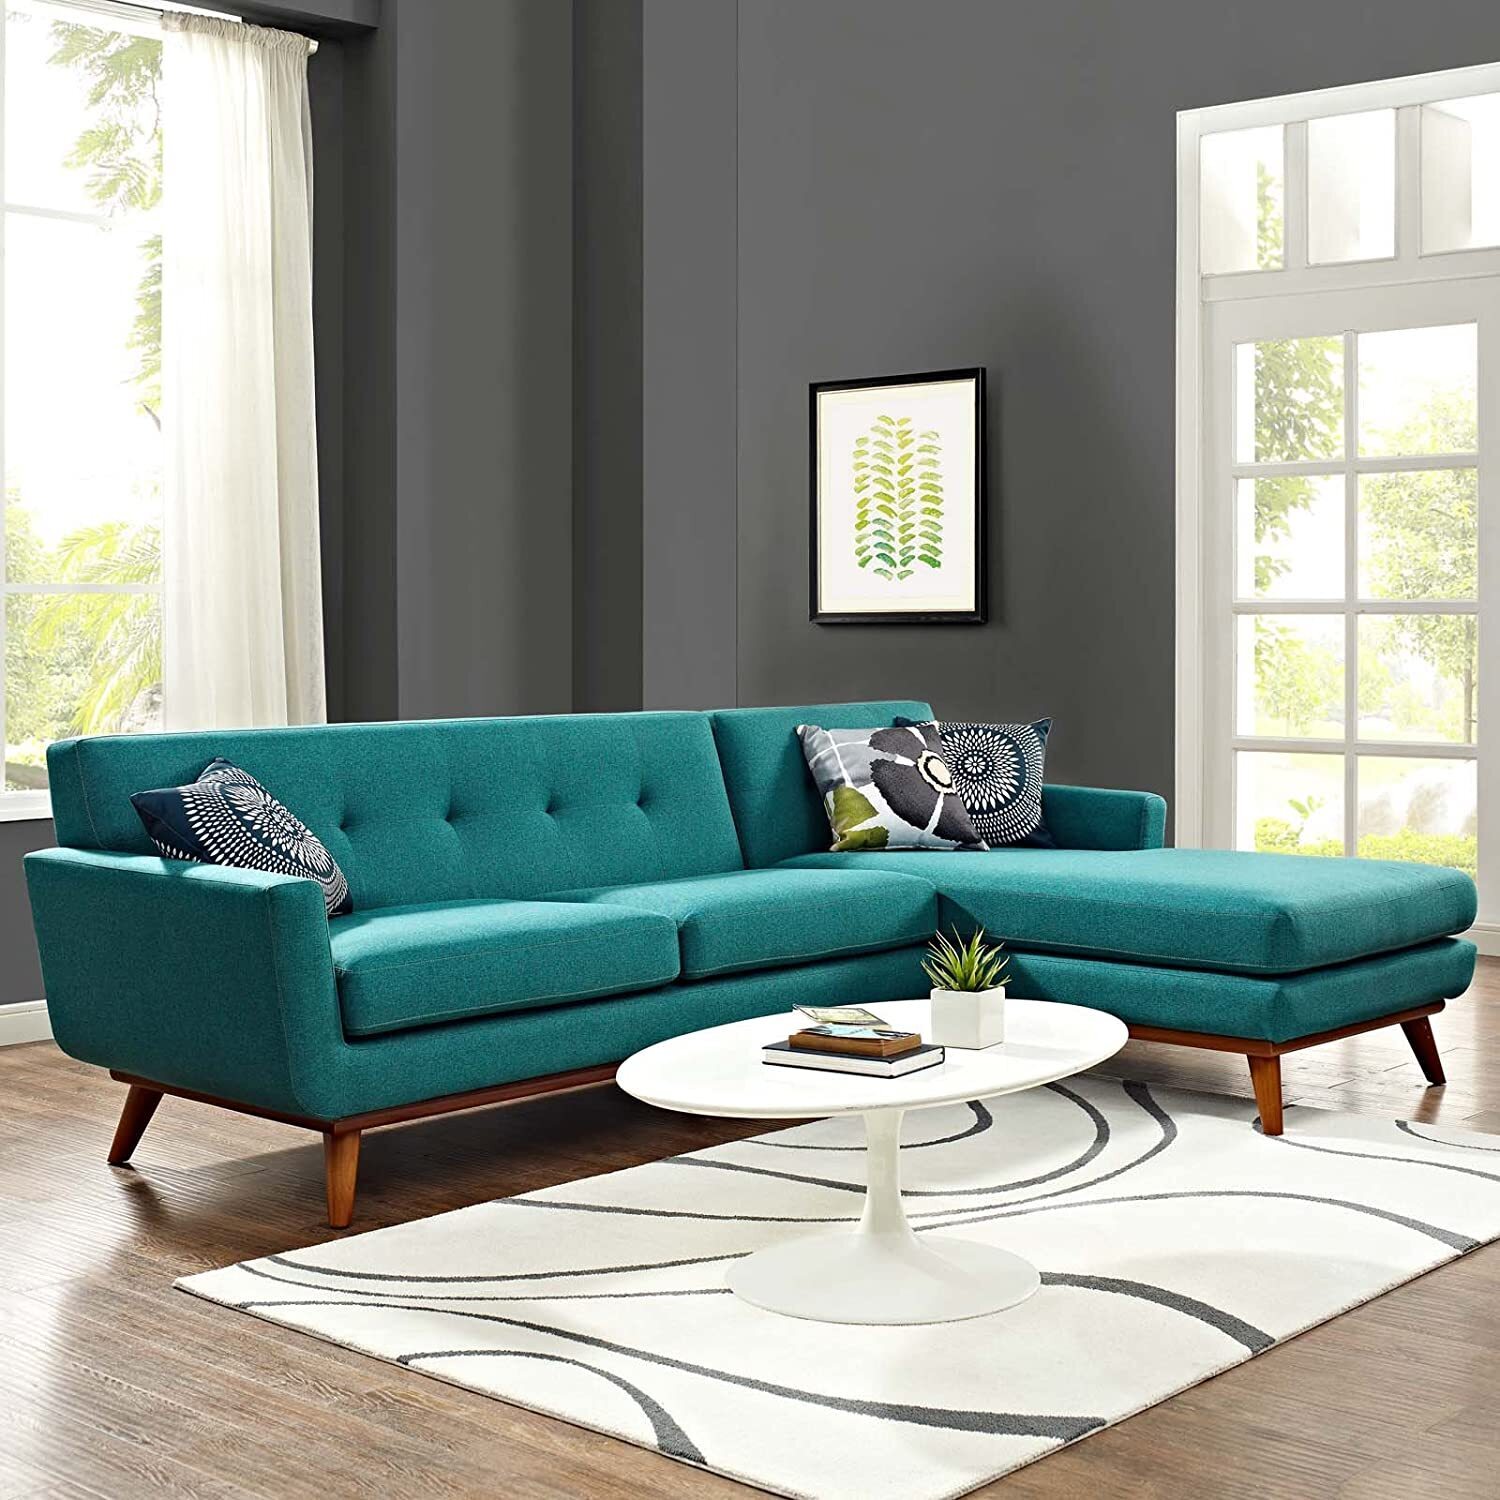 Teal Couch with Chaise